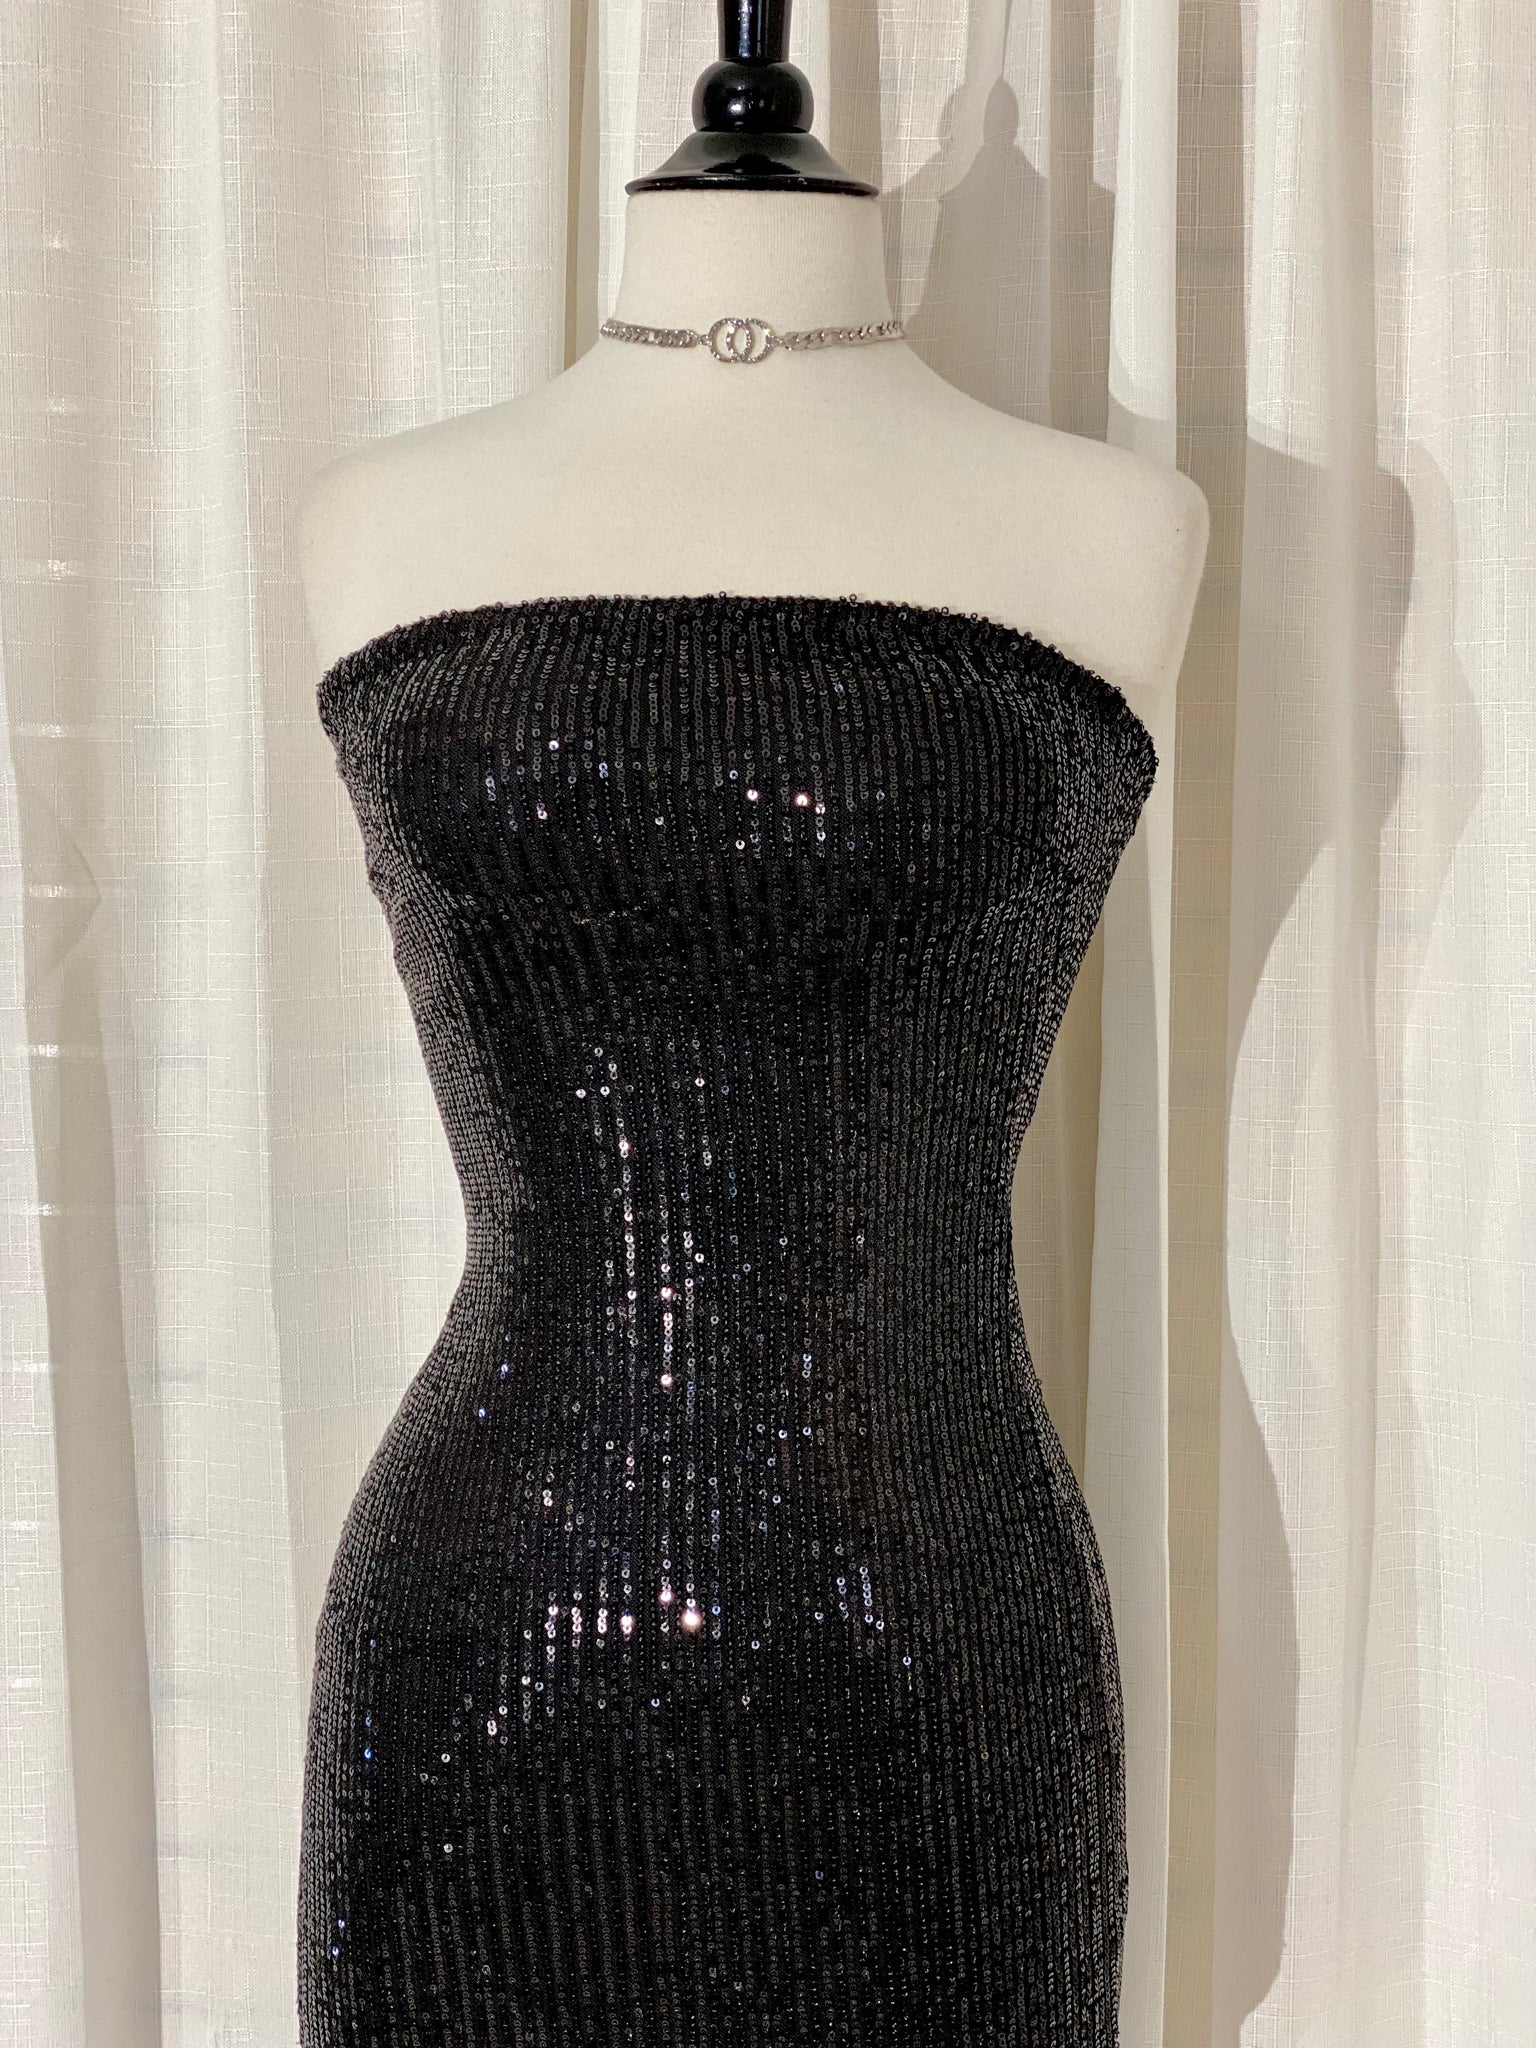 The “New Year New Me” Sequins Dress In Black